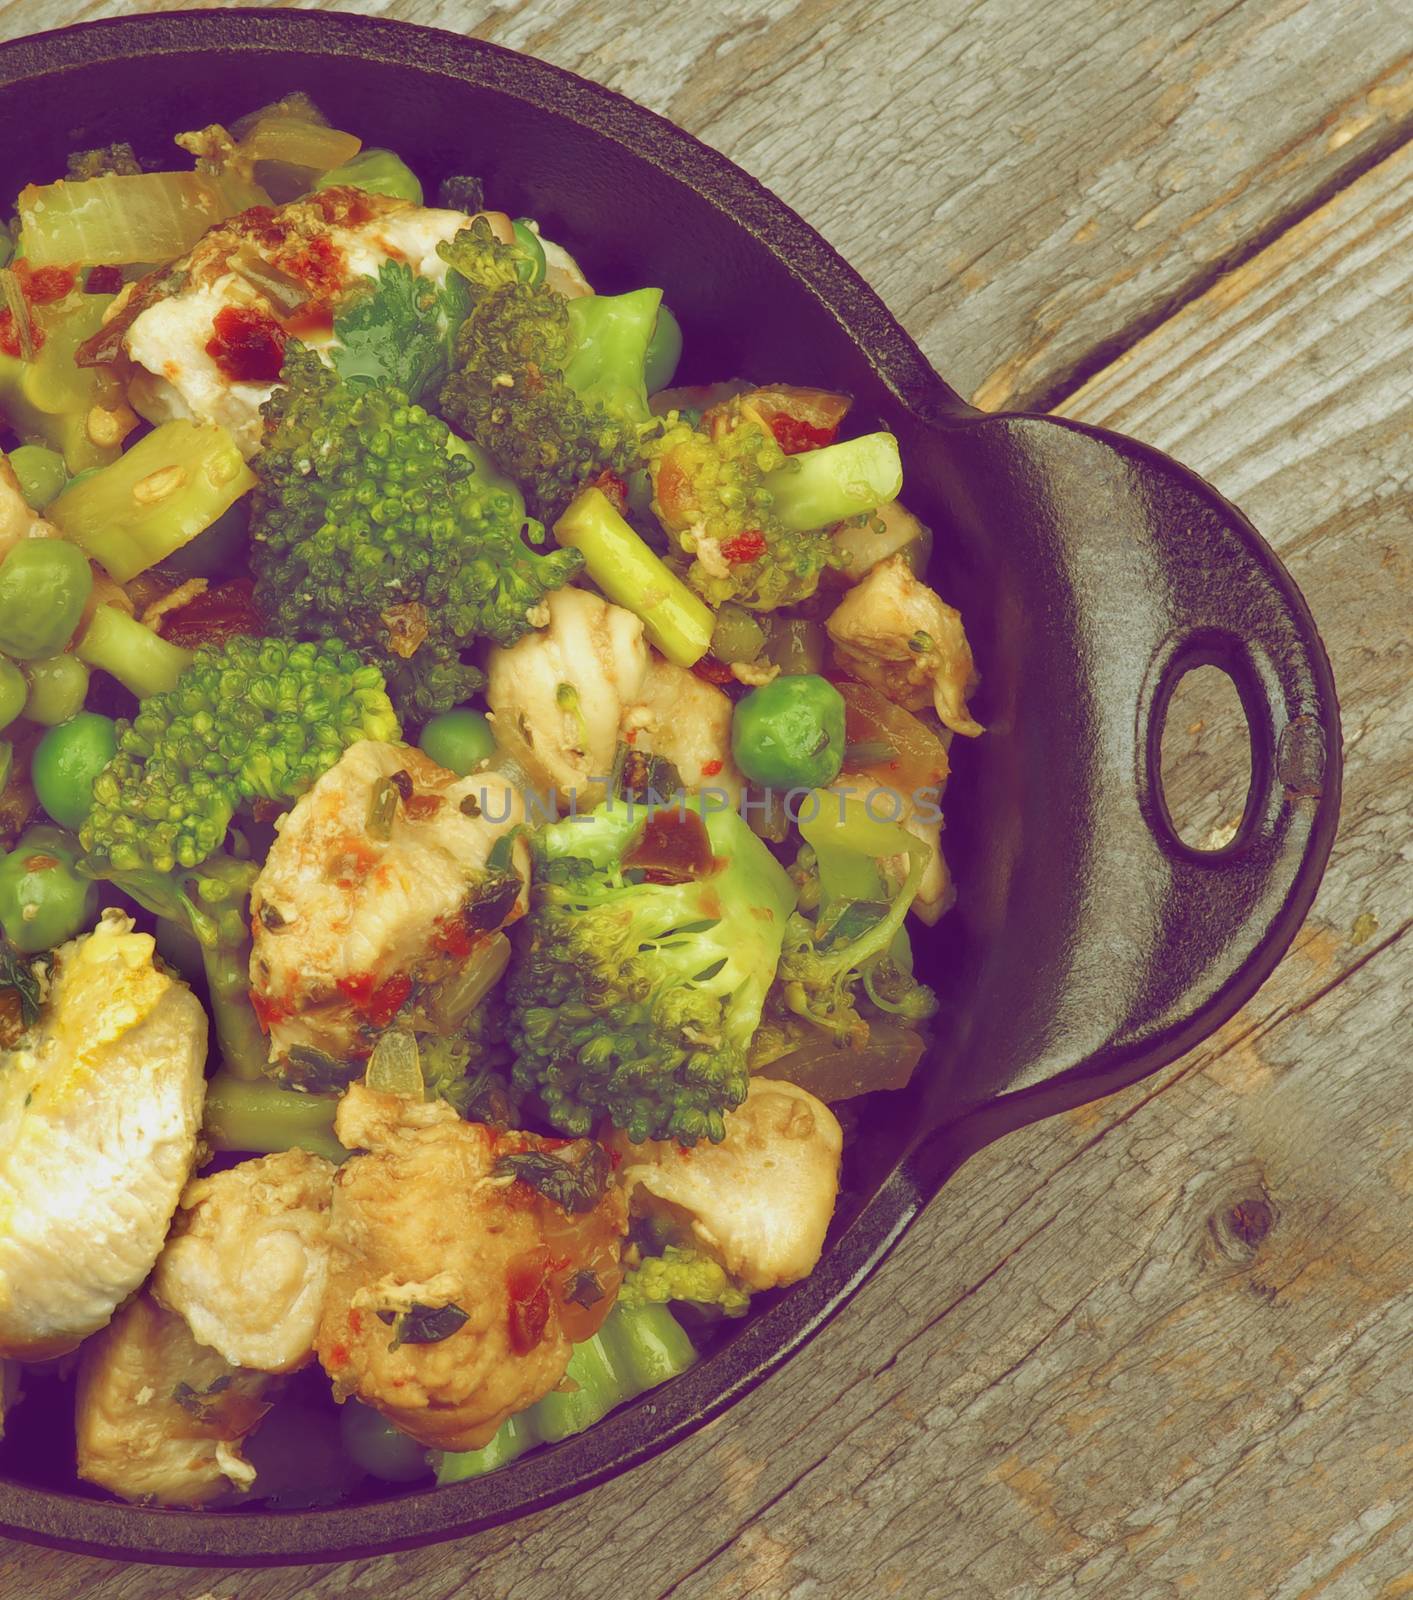 Homemade Chicken Stew with Broccoli, Bell Pepper and Green Pea in Black Saucepan on Rustic Wooden background. Retro Styled